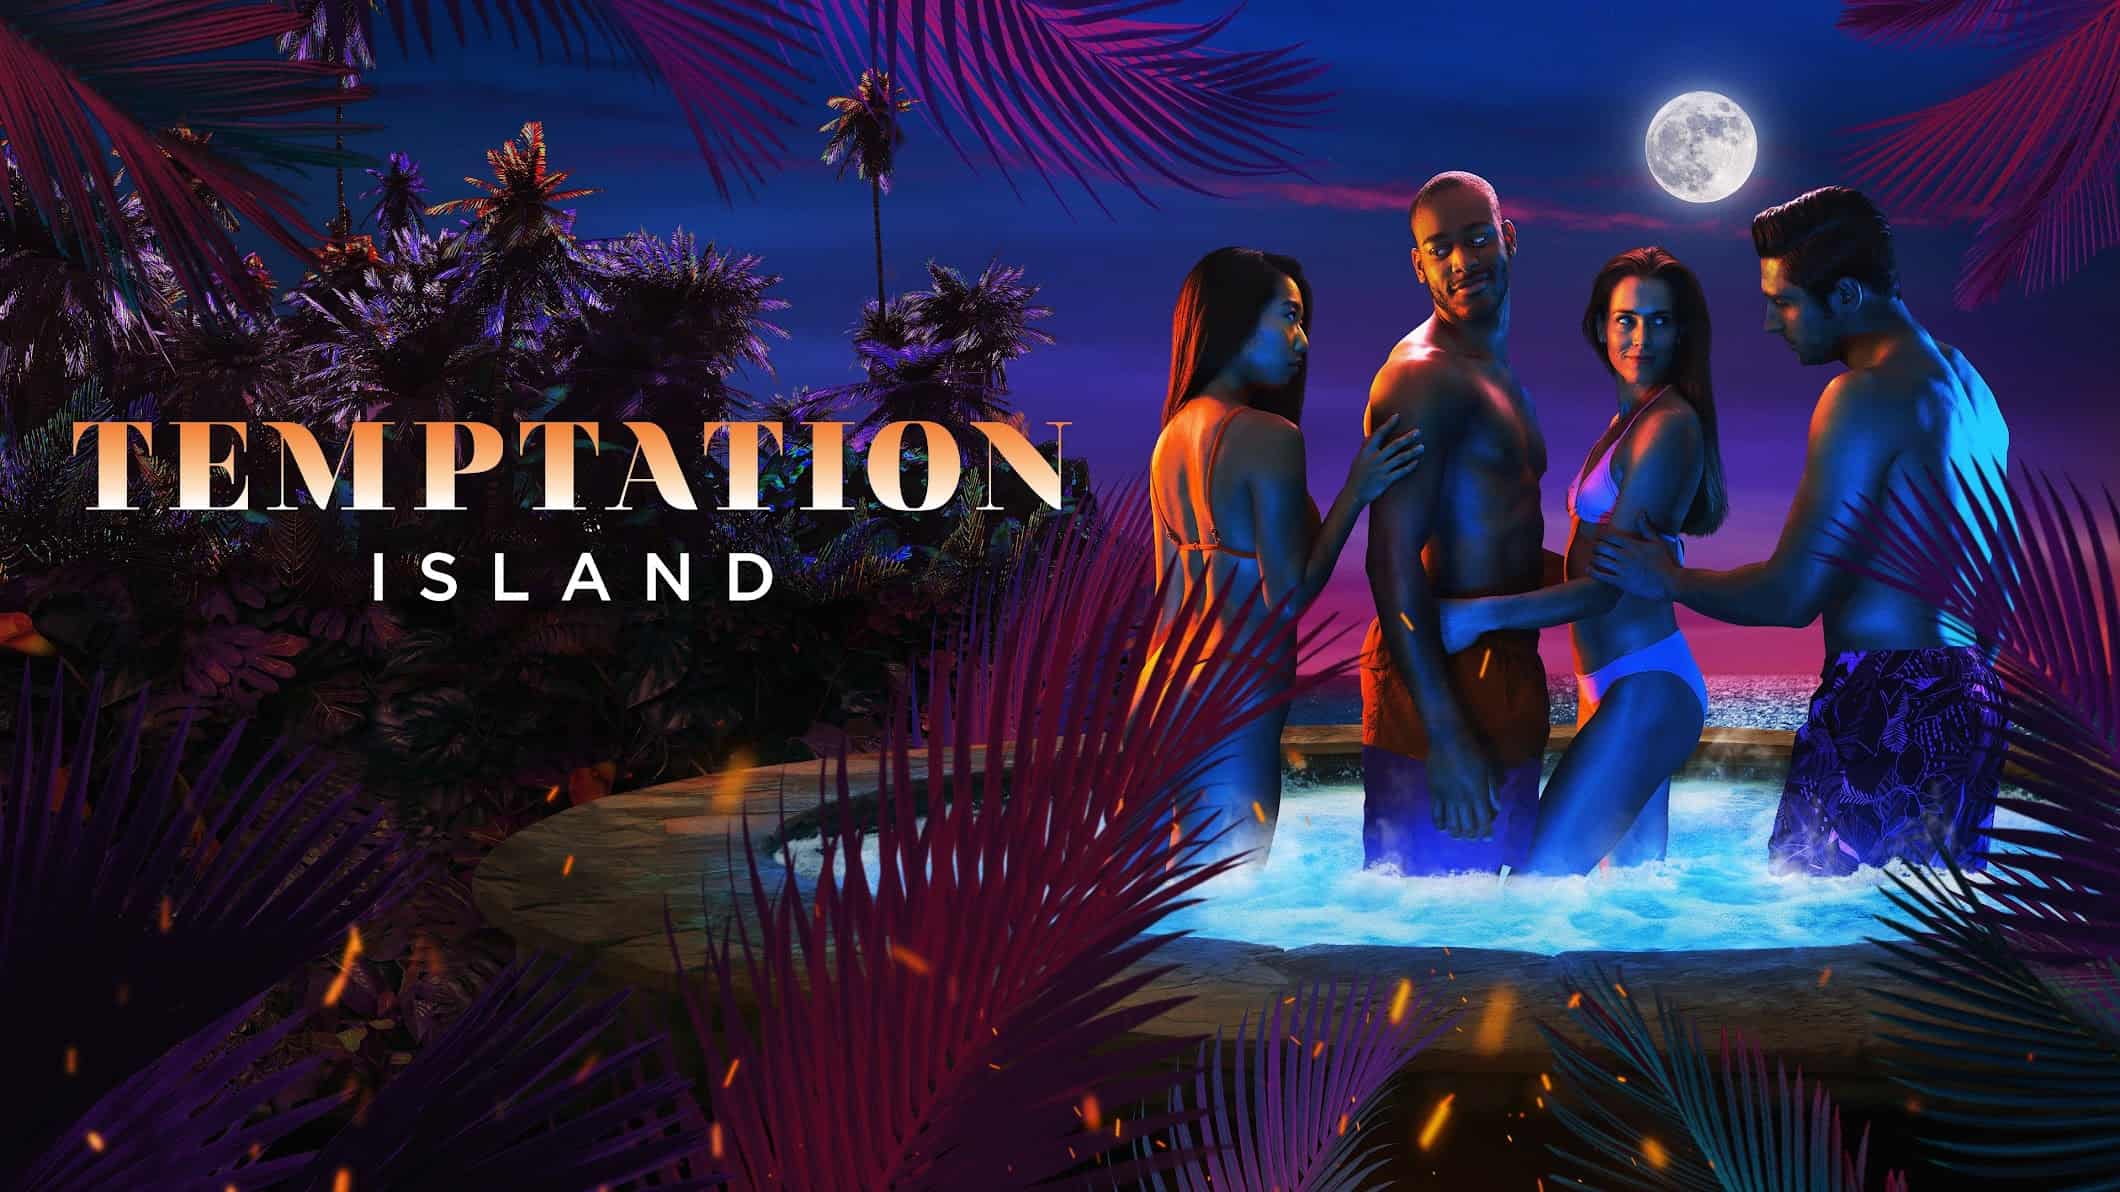 Where Can You Watch “Temptation Island?”